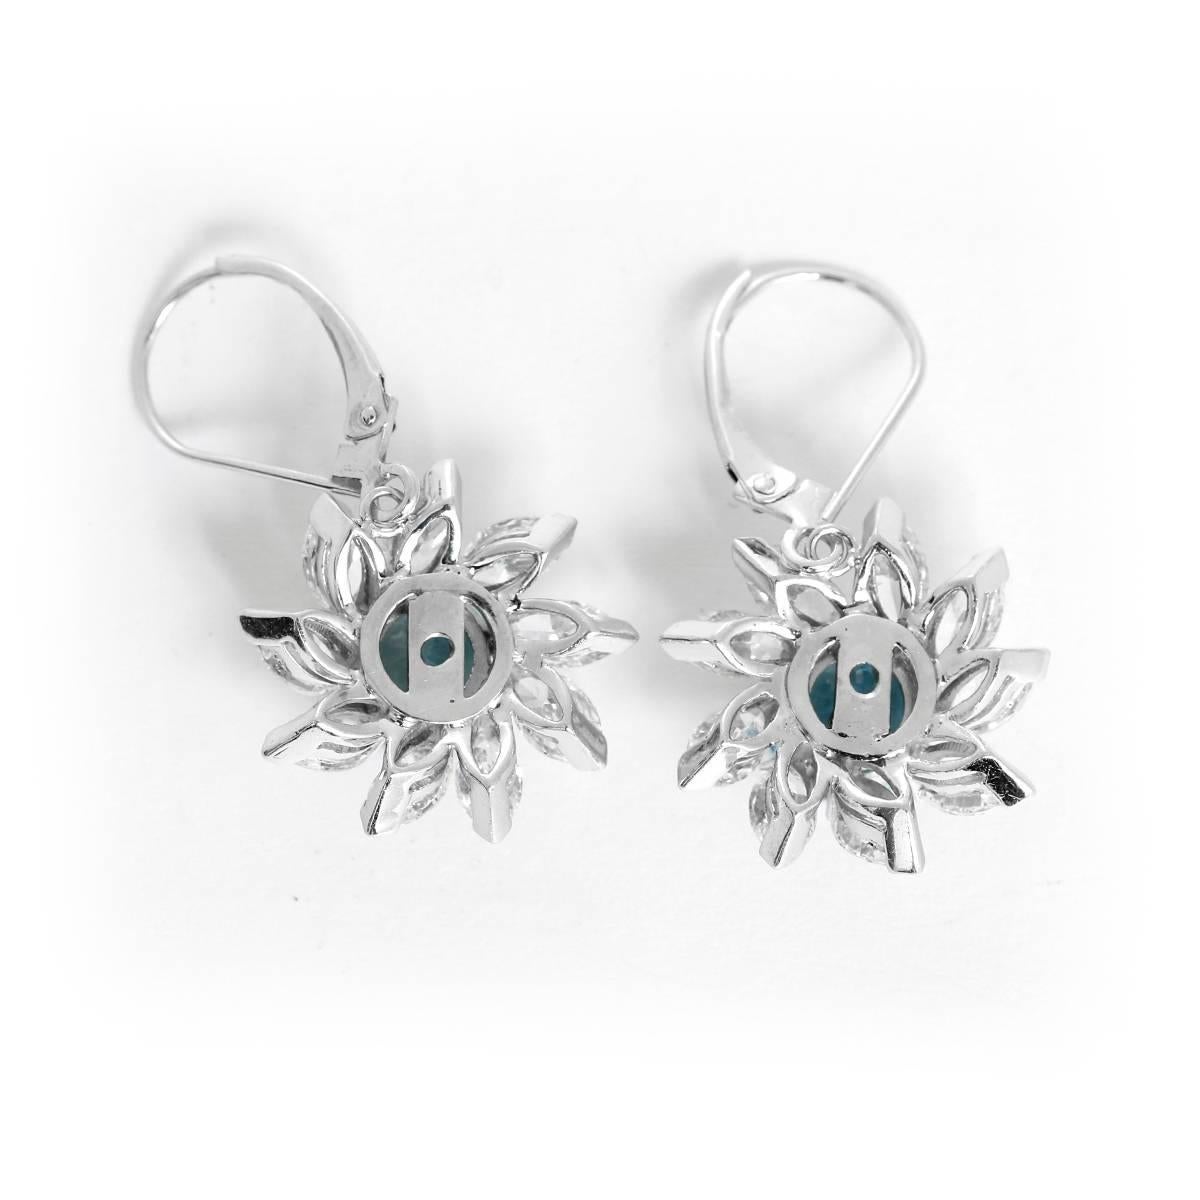 These stunning earrings feature apx. 2.50 carats of aquamarine and apx. 3.0 ctw. of diamonds set in 14k white gold.  Earrings measure apx. 5/8-inch in diameter. Total weight is 5.2 grams.